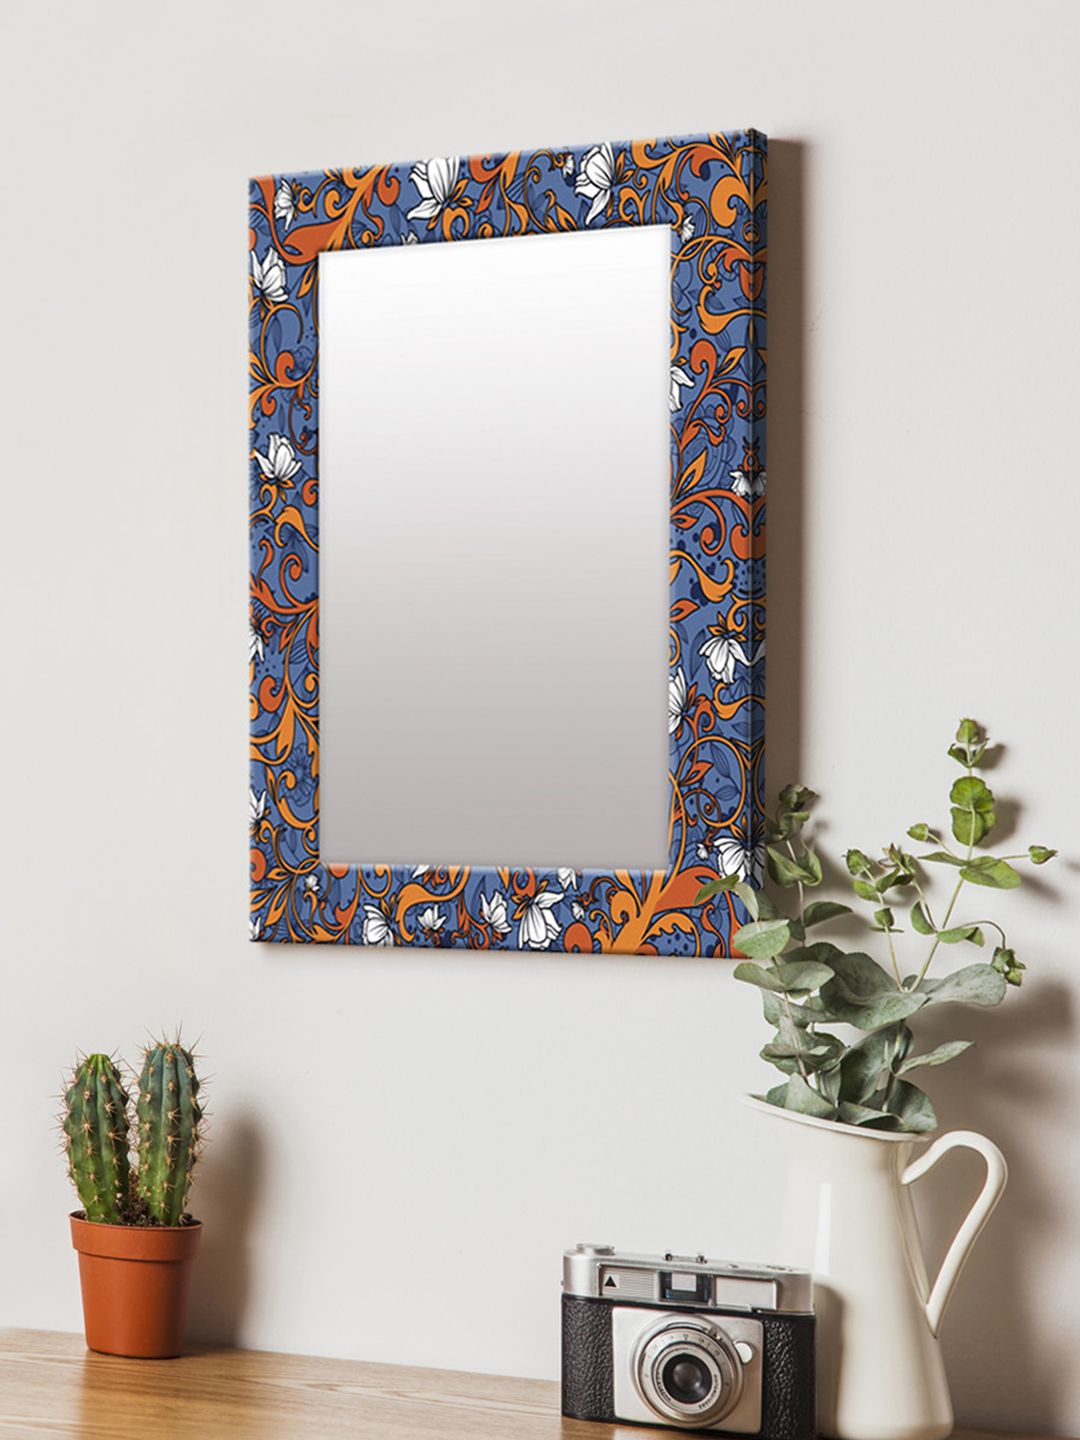 999Store Orange & Blue Printed MDF Wall Mirror Price in India